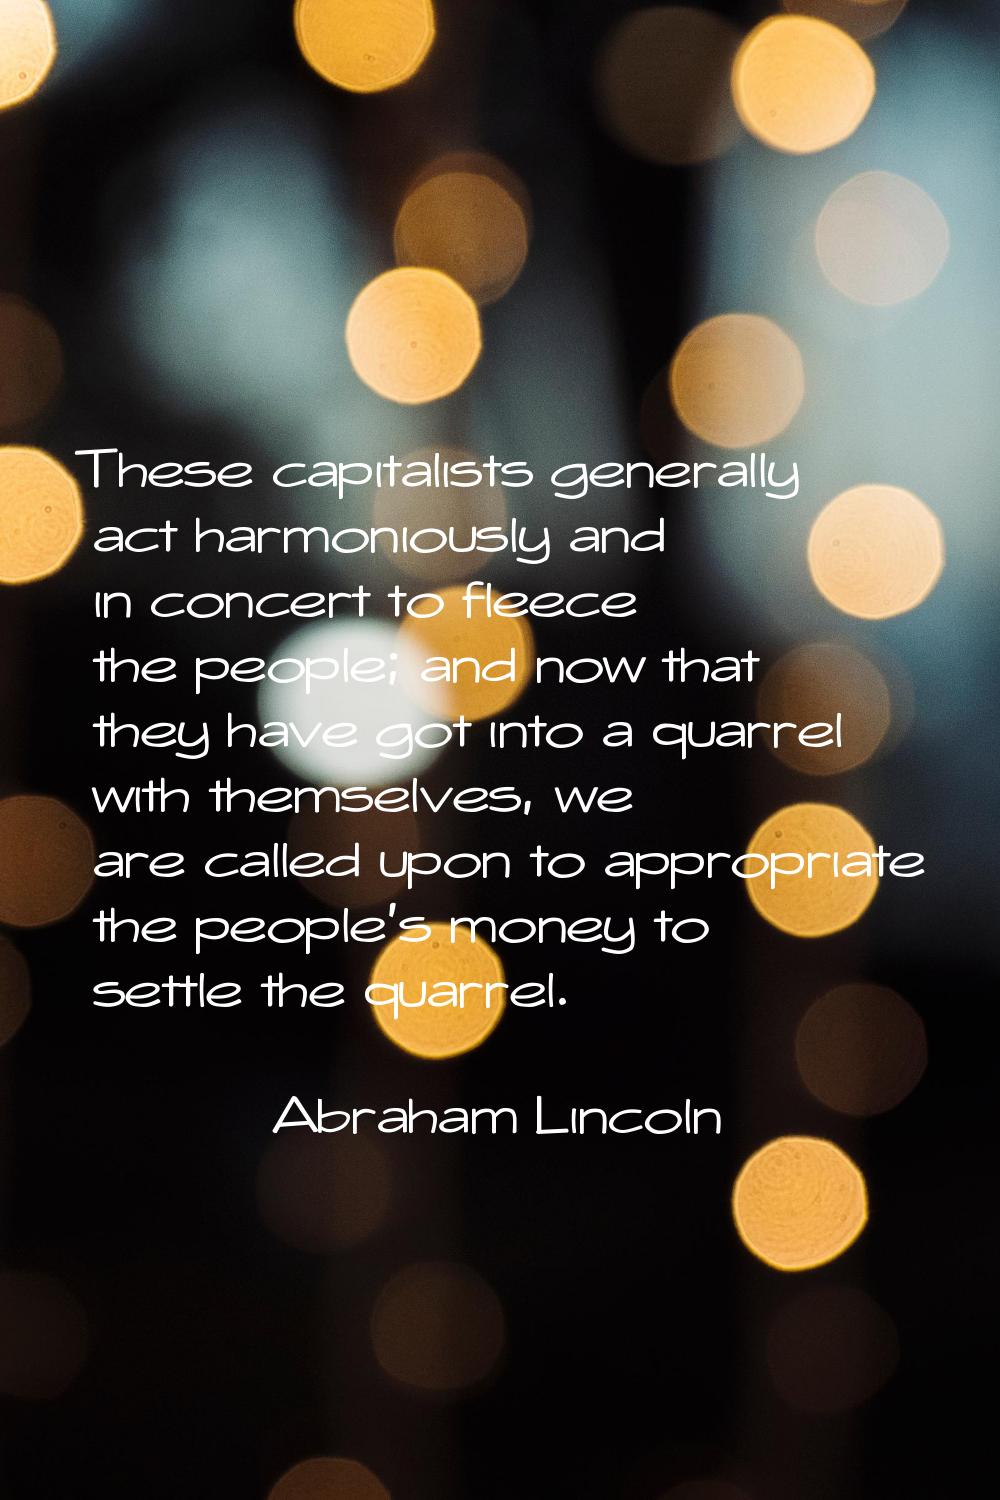 These capitalists generally act harmoniously and in concert to fleece the people; and now that they